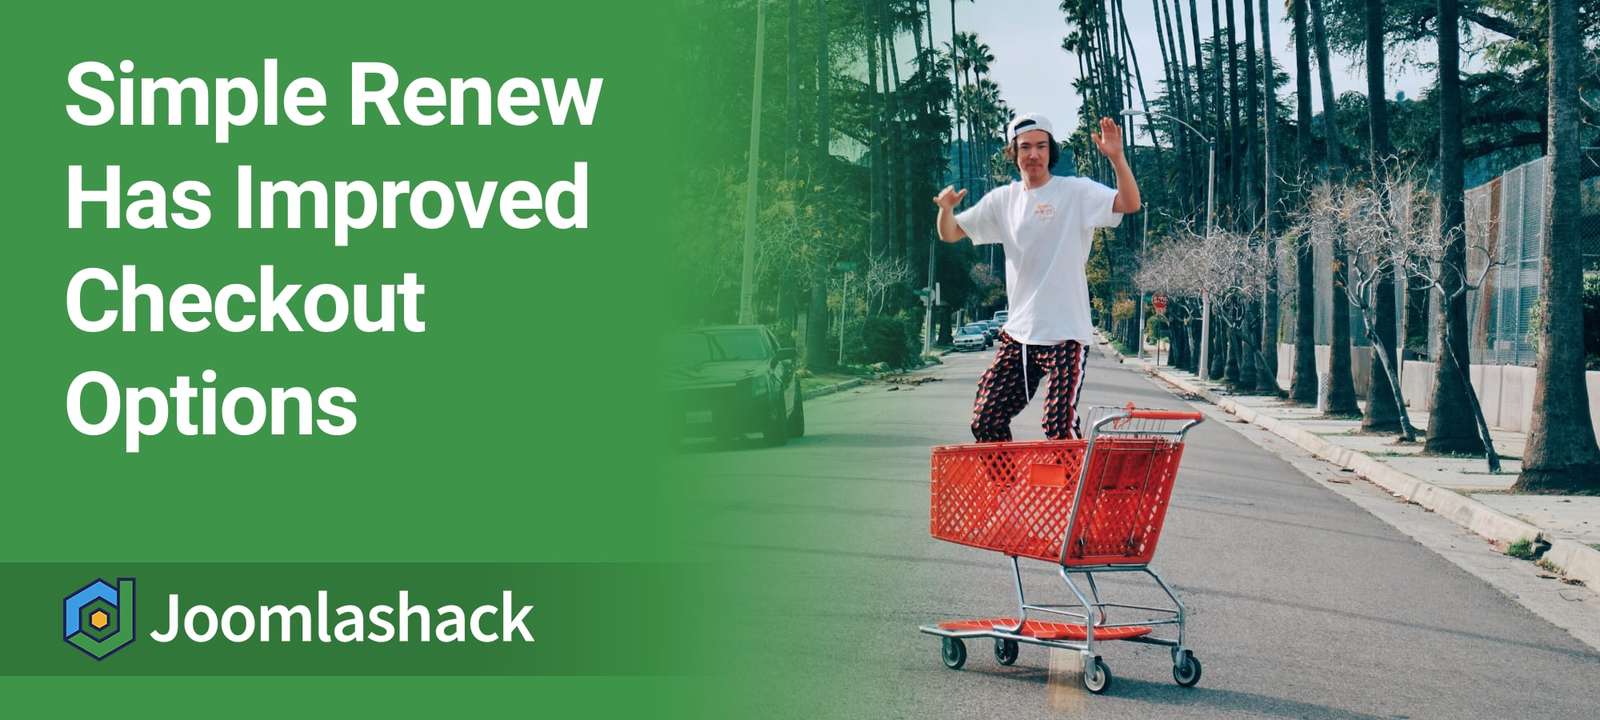 Simple Renew Has Improved Checkout Options